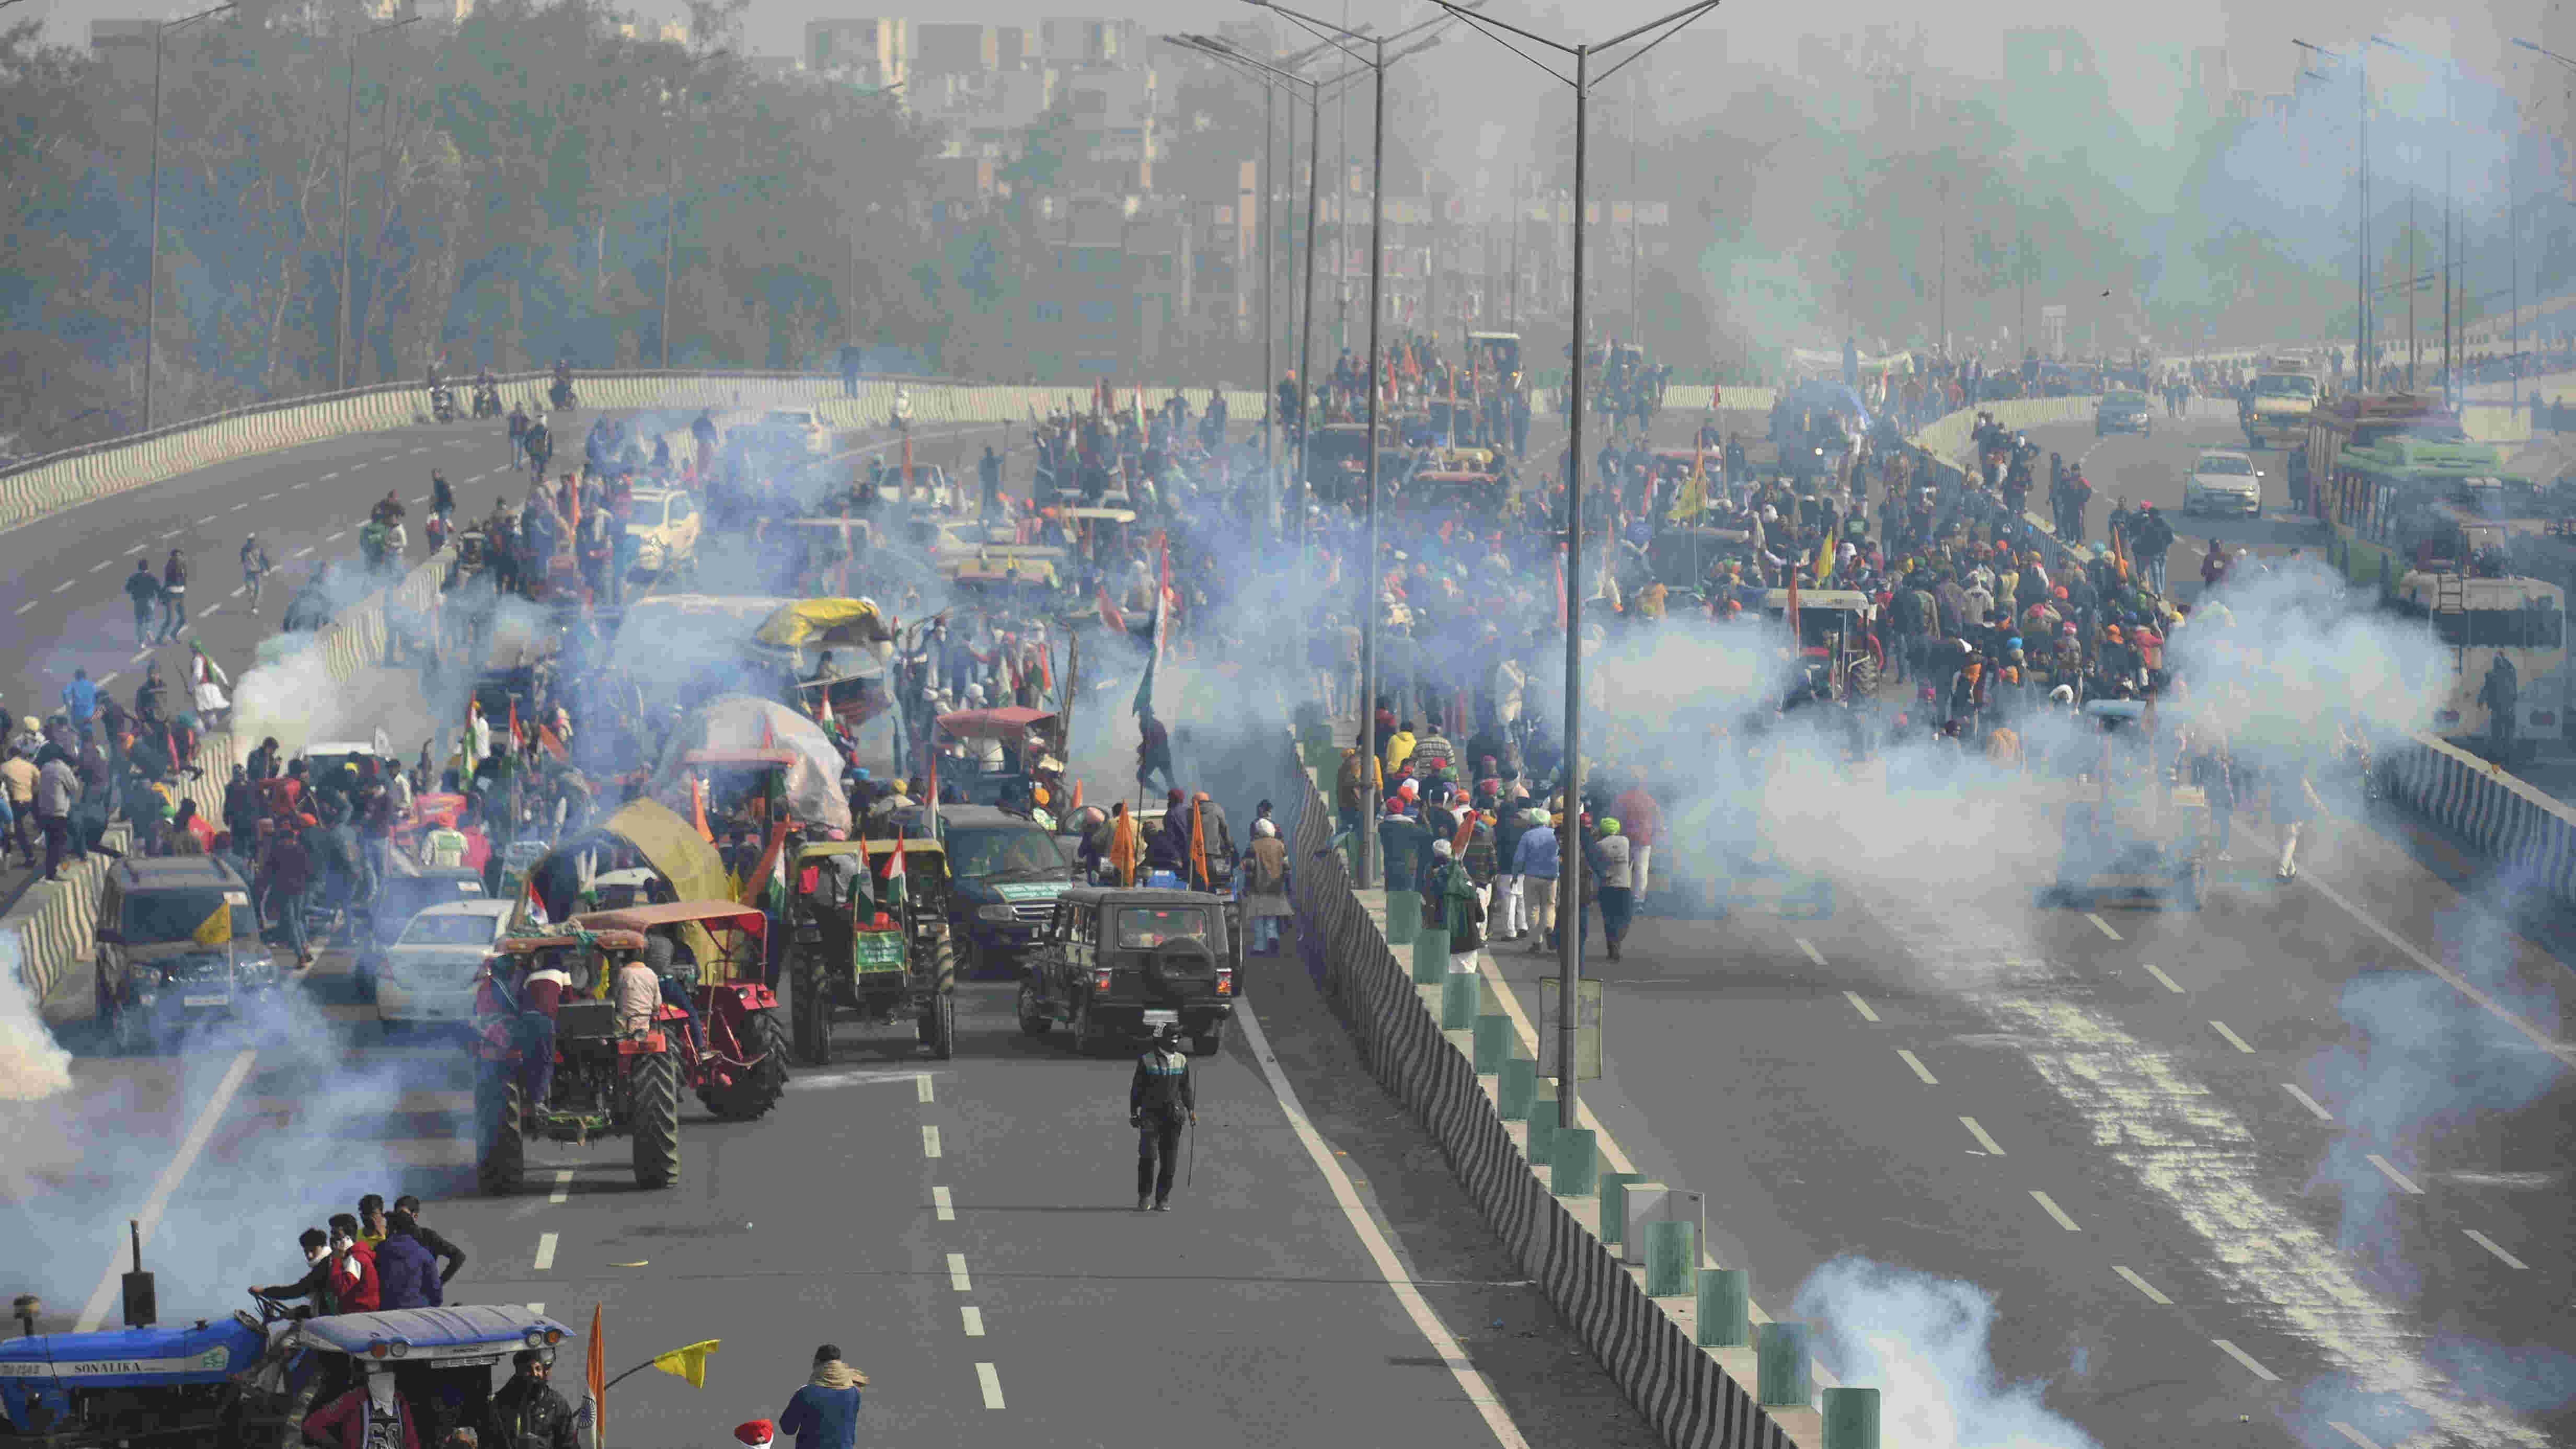 Police fire teargas shells to disperse protesting farmers who were attempting to break barricades at Ghazipur border during their tractor march on Republic Day, in New Delhi, Tuesday, Jan. 26, 2021.